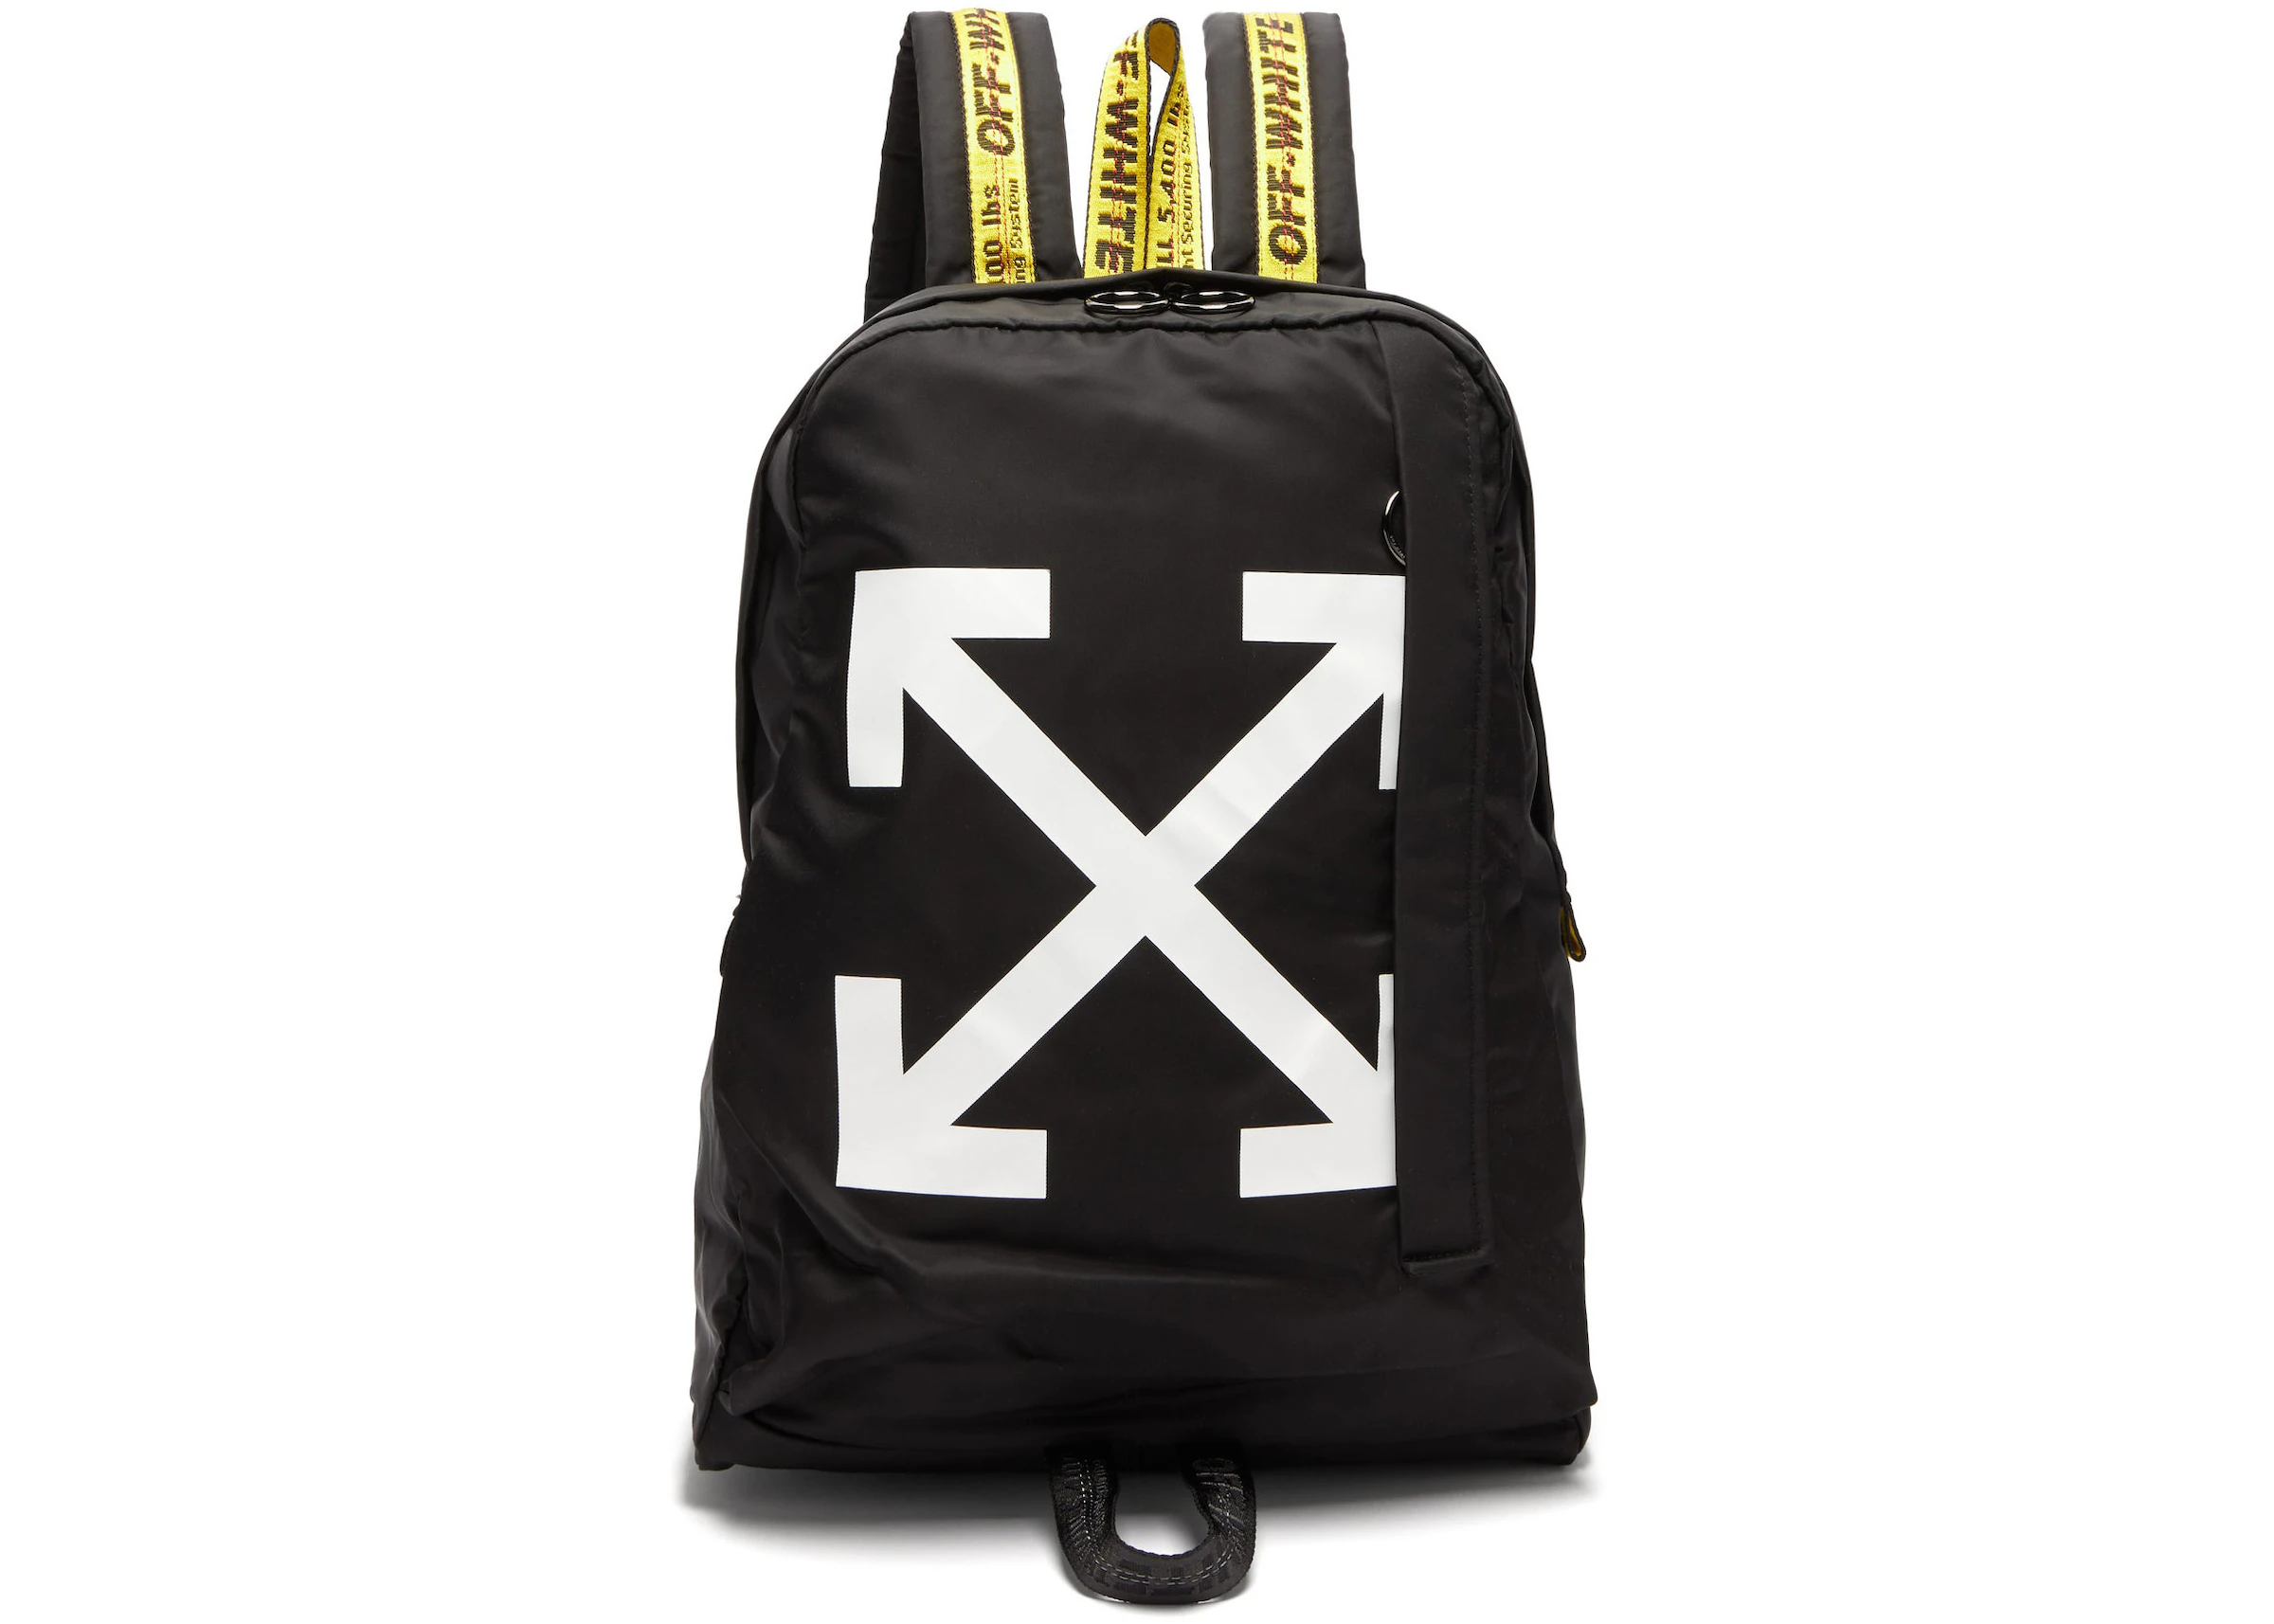 Sidewalk dishonest Explosives OFF-WHITE Easy Backpack Black White Yellow in Polymide with Gunmetal - US